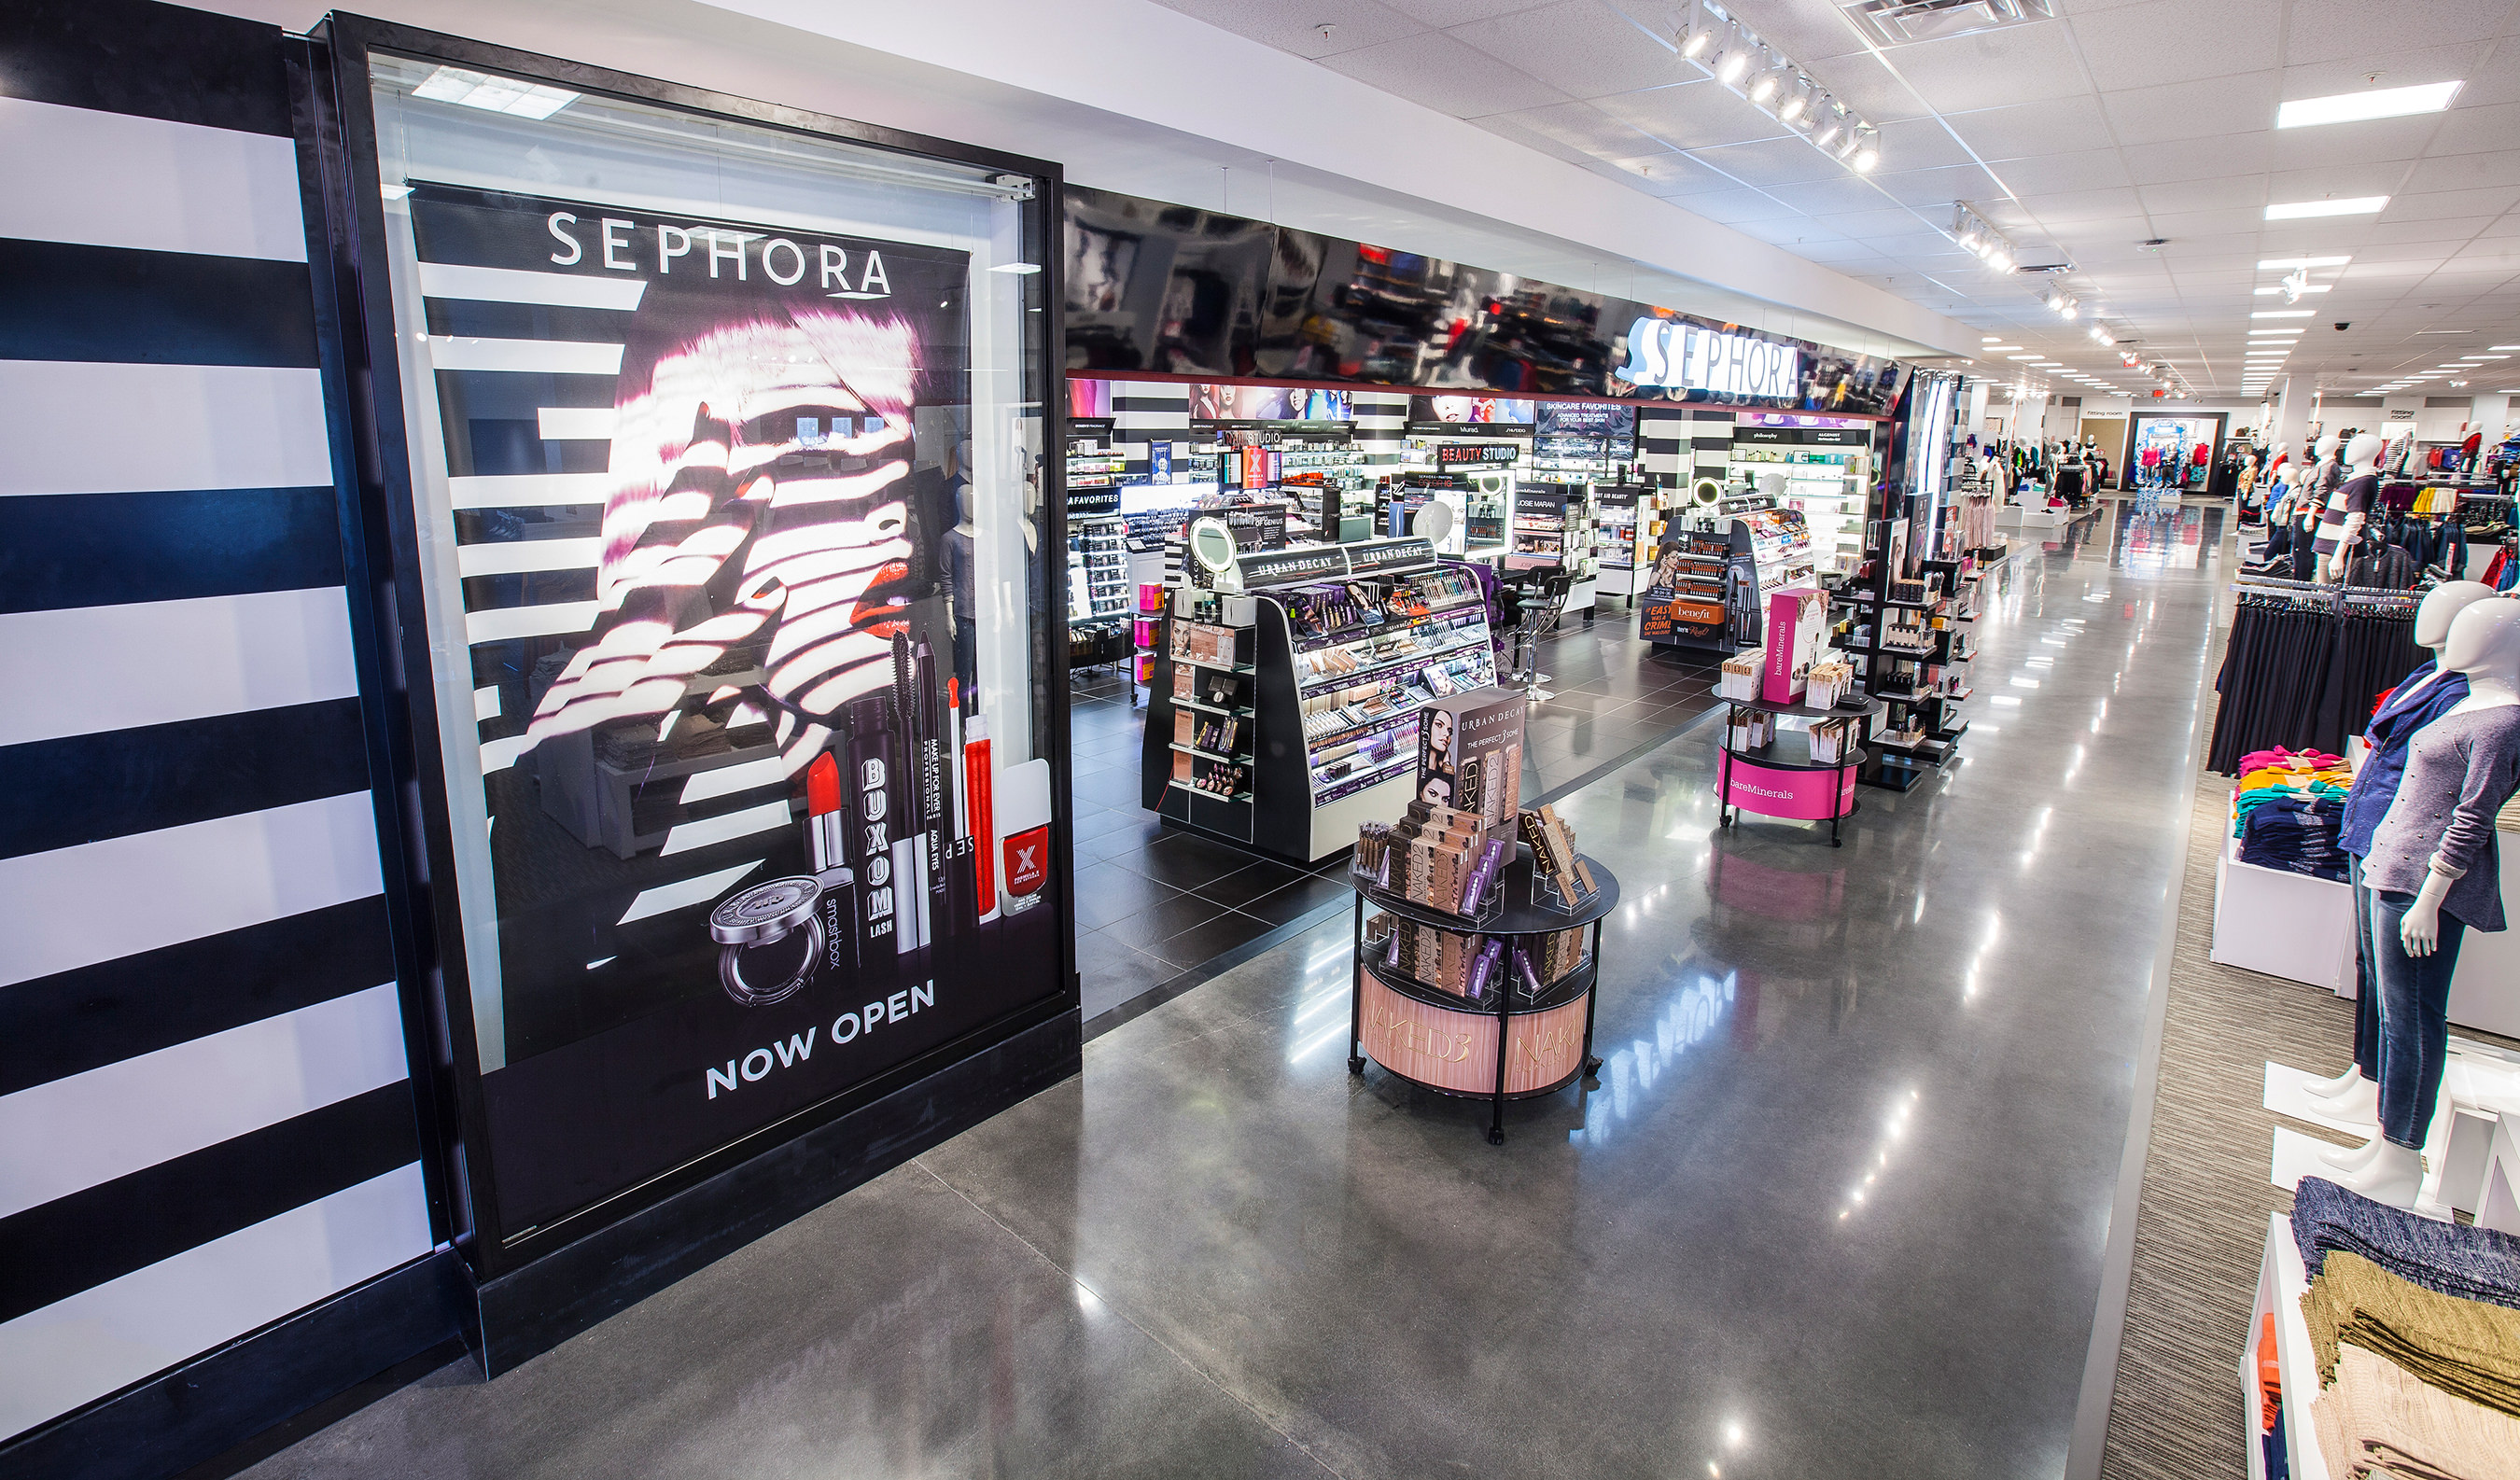 Photo of JC Penney's Sephora boutique-in-store, courtesy of Nordstrom